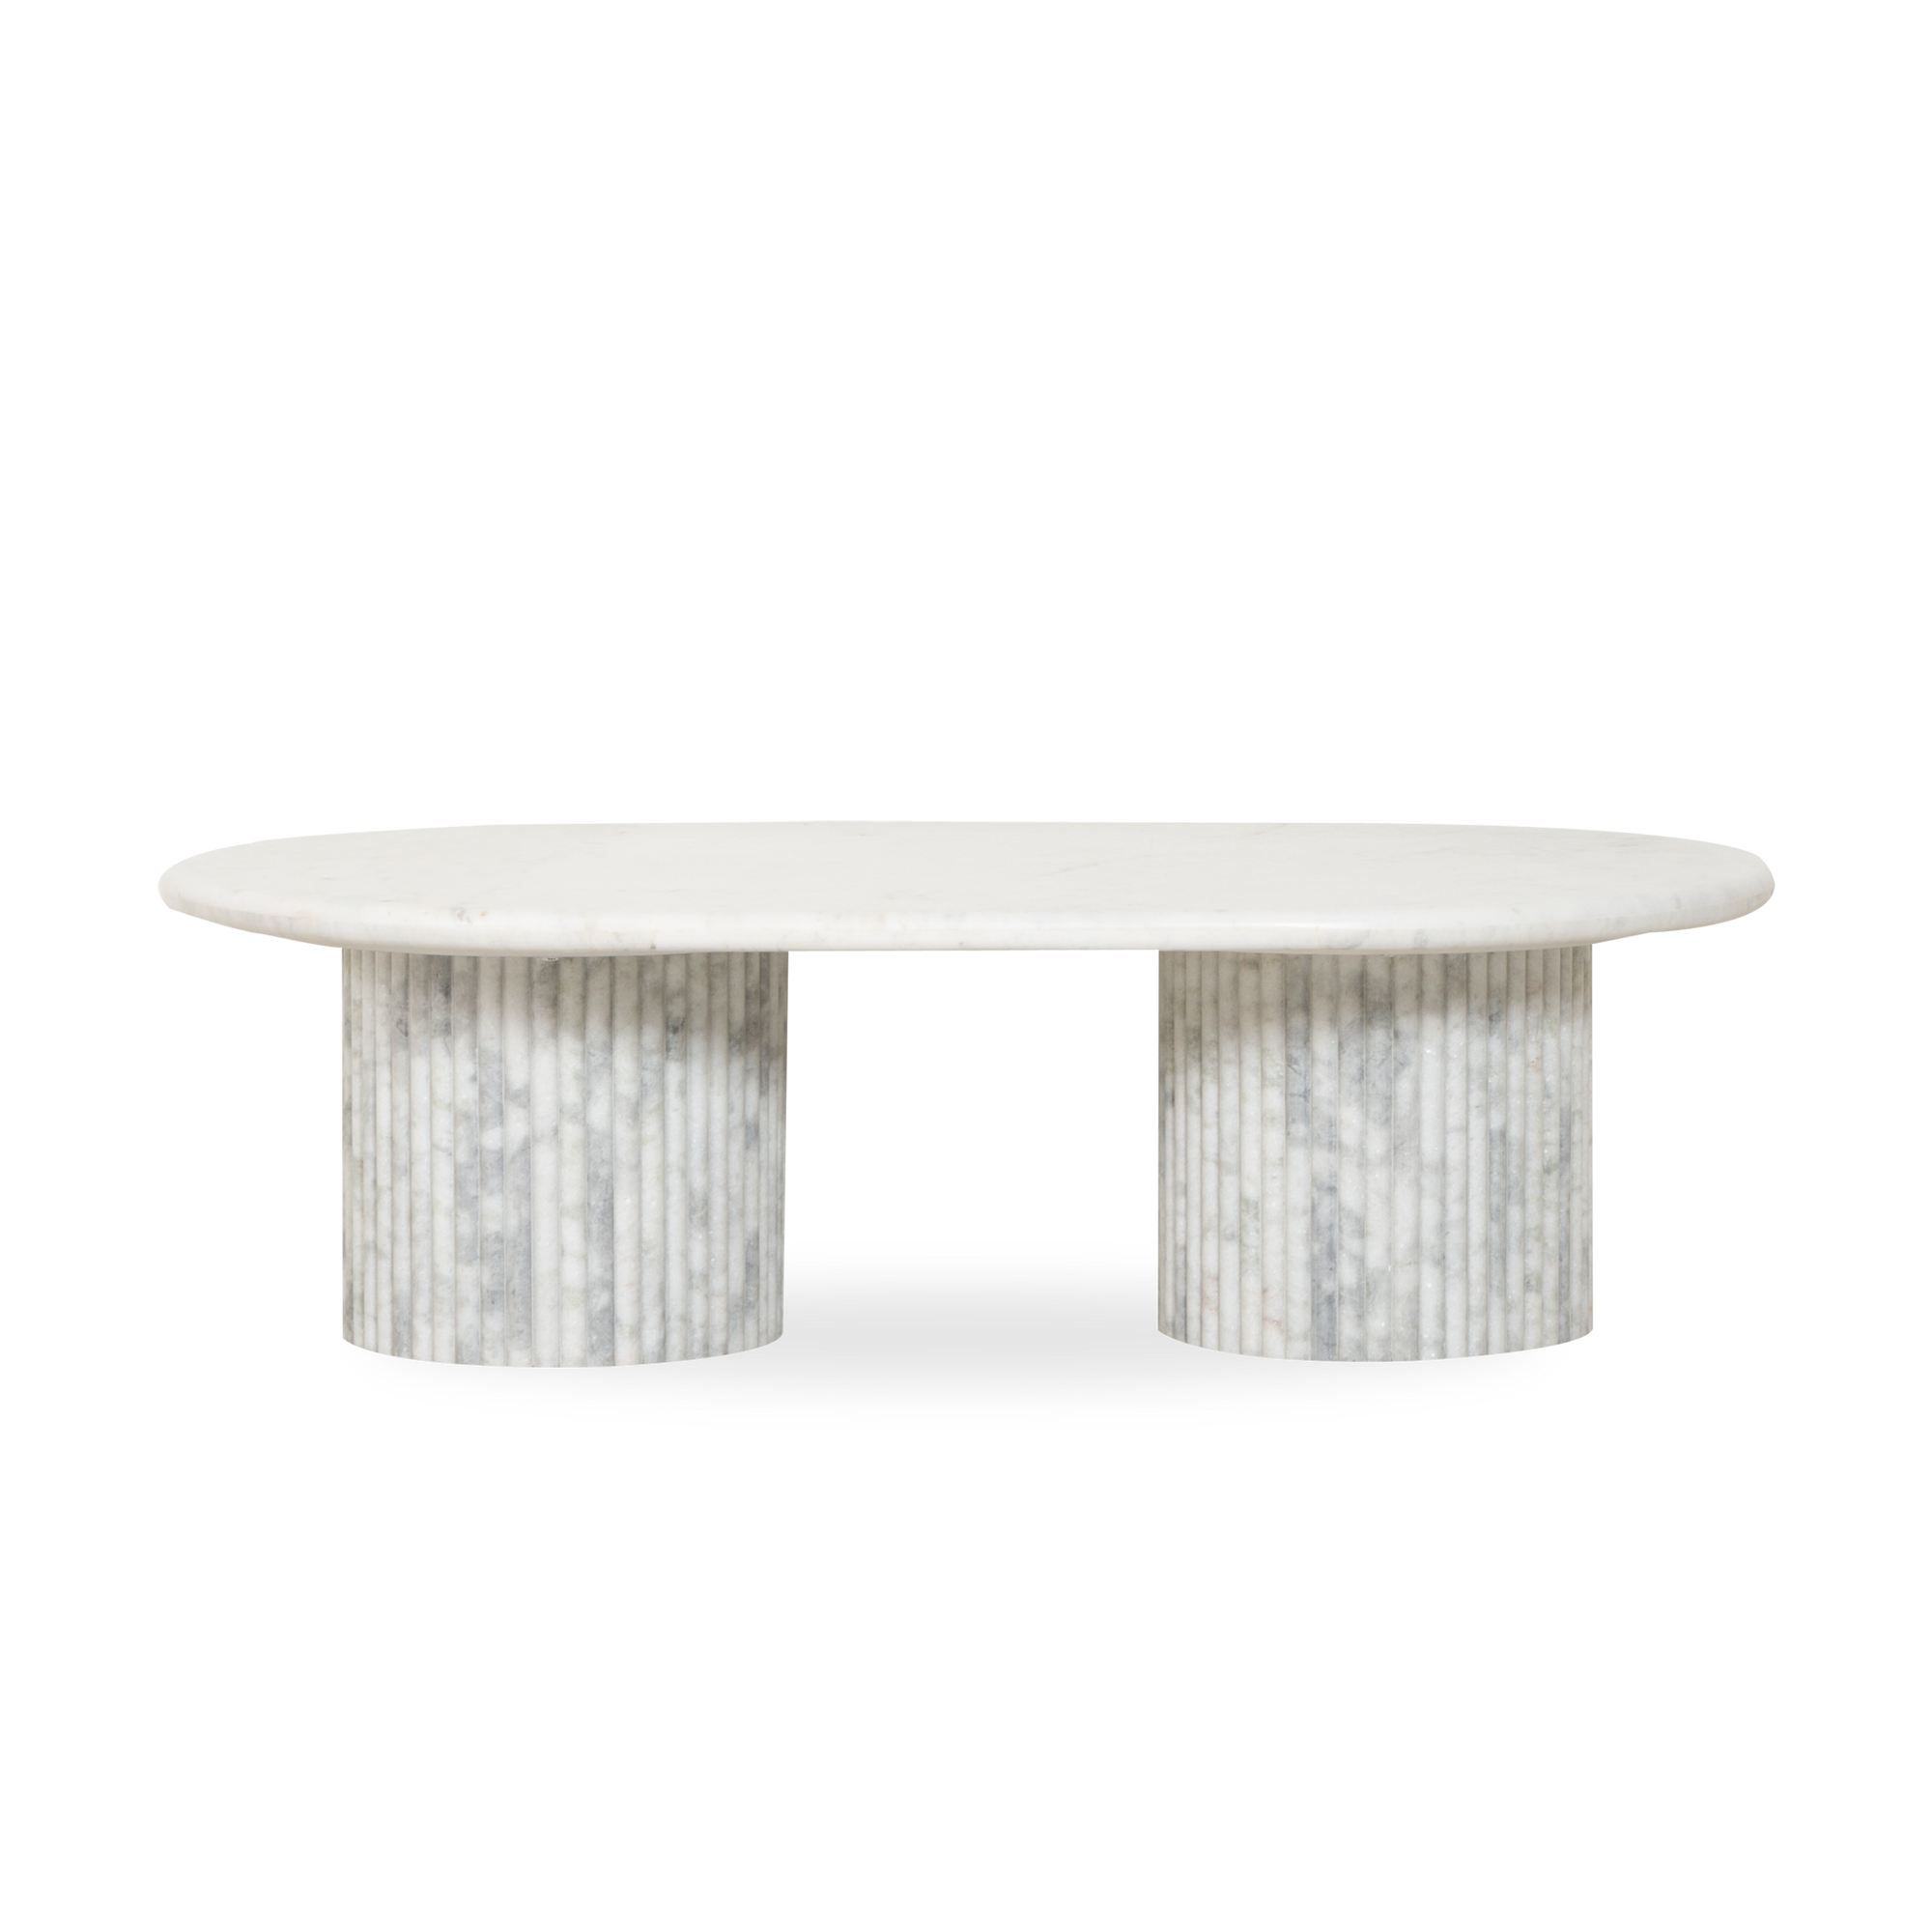 A contemporary take on Italian modern design, the Nero Dining Table is effortlessly cool.